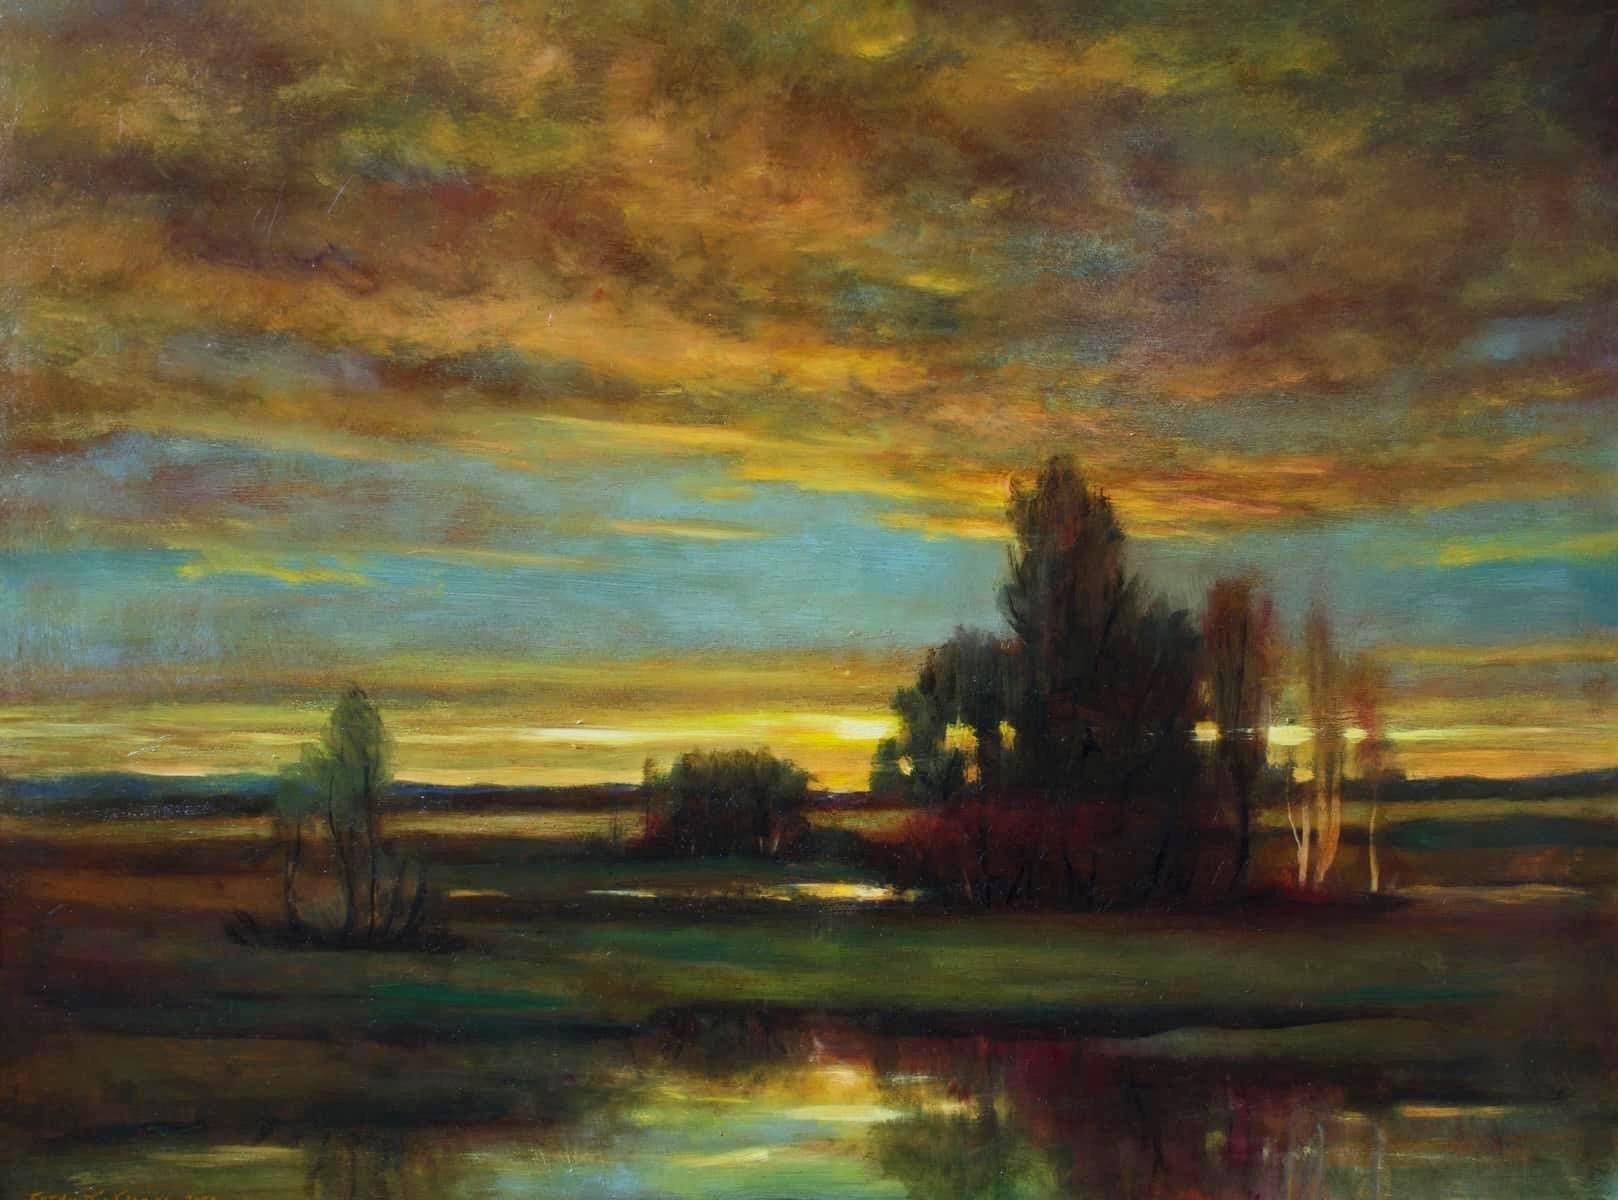 Rose Freymuth-Frazier Landscape Painting - Sacred Space - Original Oil Painting w/ Setting Sun Reflecting Romantic Colors